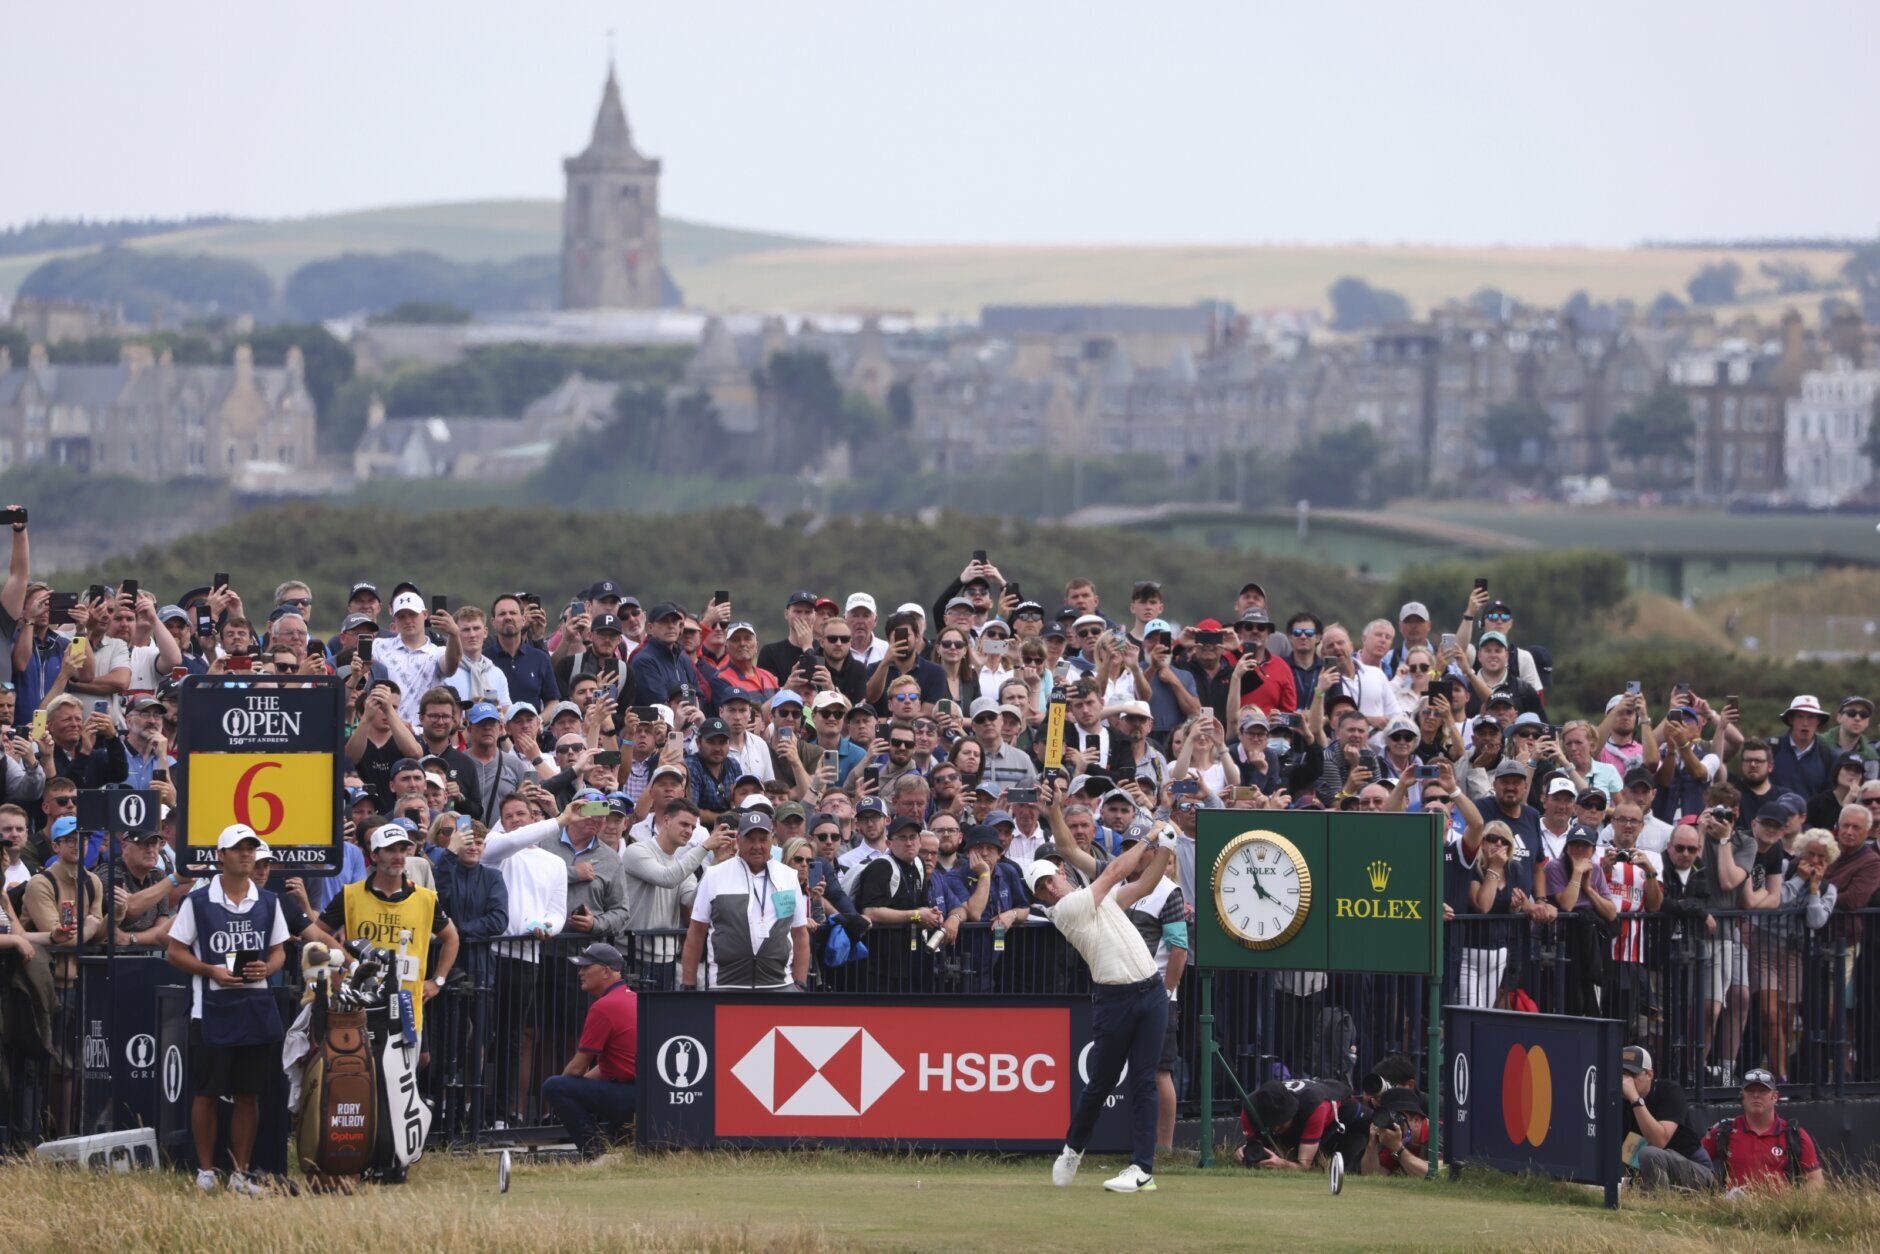 Rory McIlroy of Northern Ireland plays from the 6th tee during the final round of the British Open golf championship on the Old Course at St. Andrews, Scotland, Sunday July 17, 2022. (AP Photo/Peter Morrison)